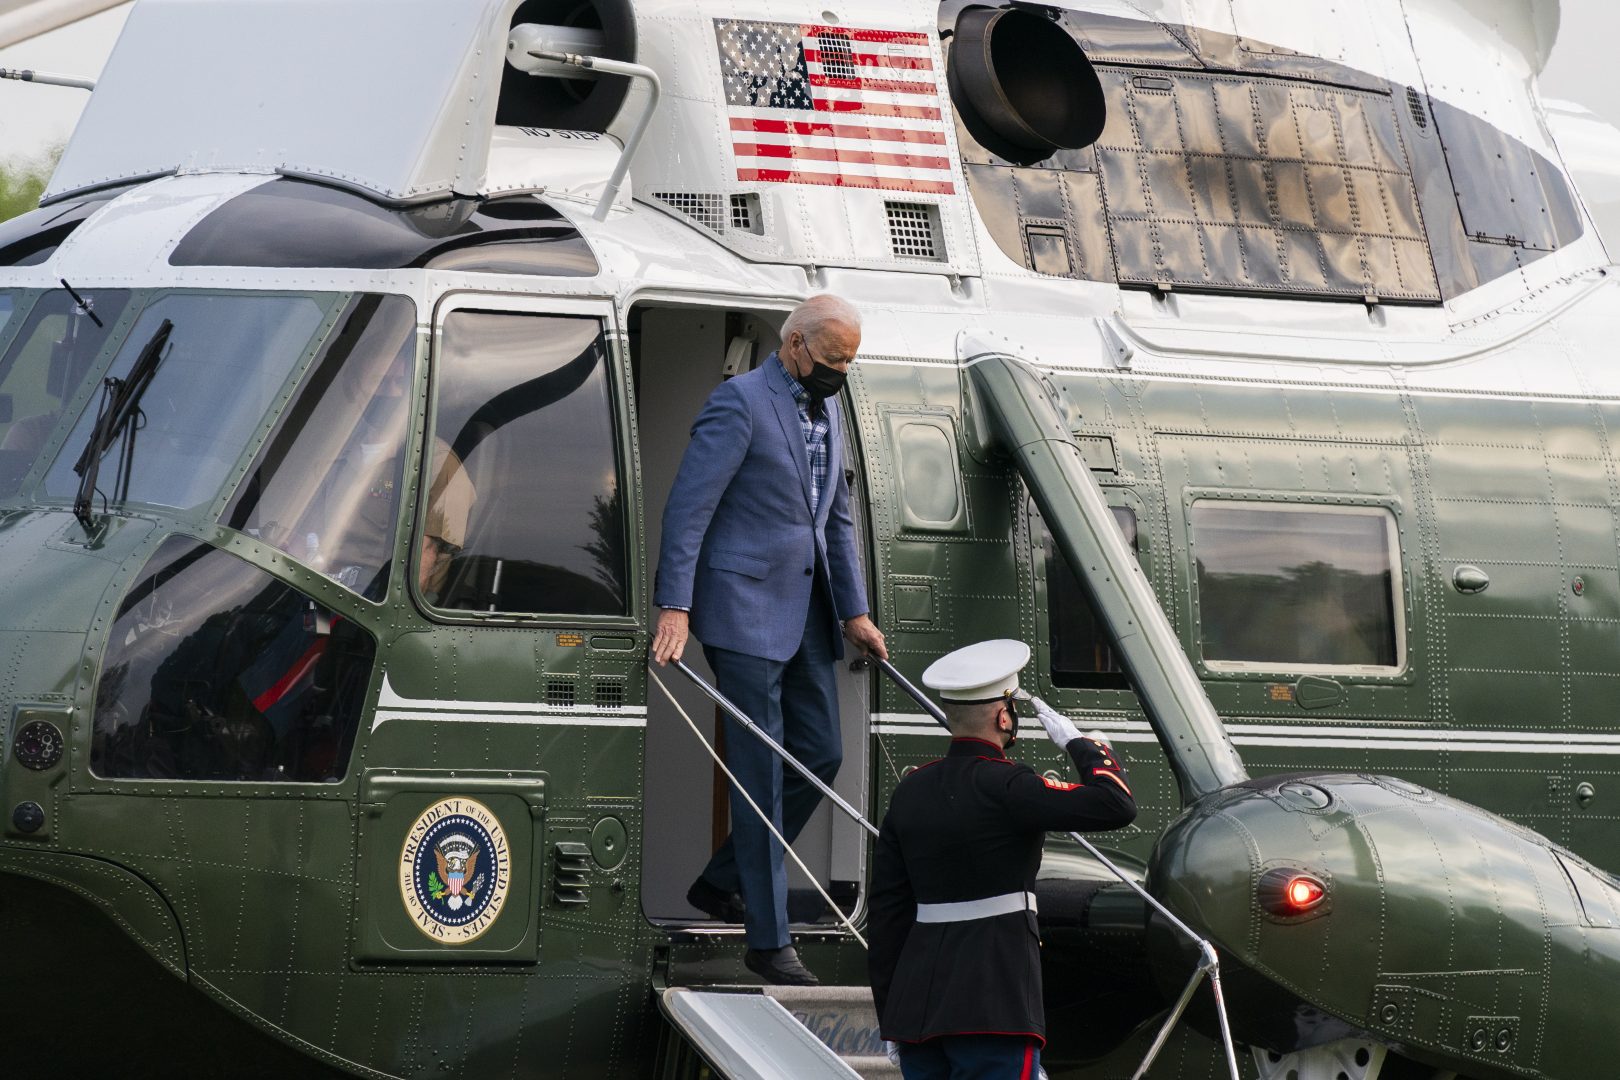 A Marine Corps honor guard salutes as President Joe Biden disembarks from Marine One on the Ellipse near the White House after spending the weekend in Wilmington, Del., Sunday, April 25, 2021, in Washington. 